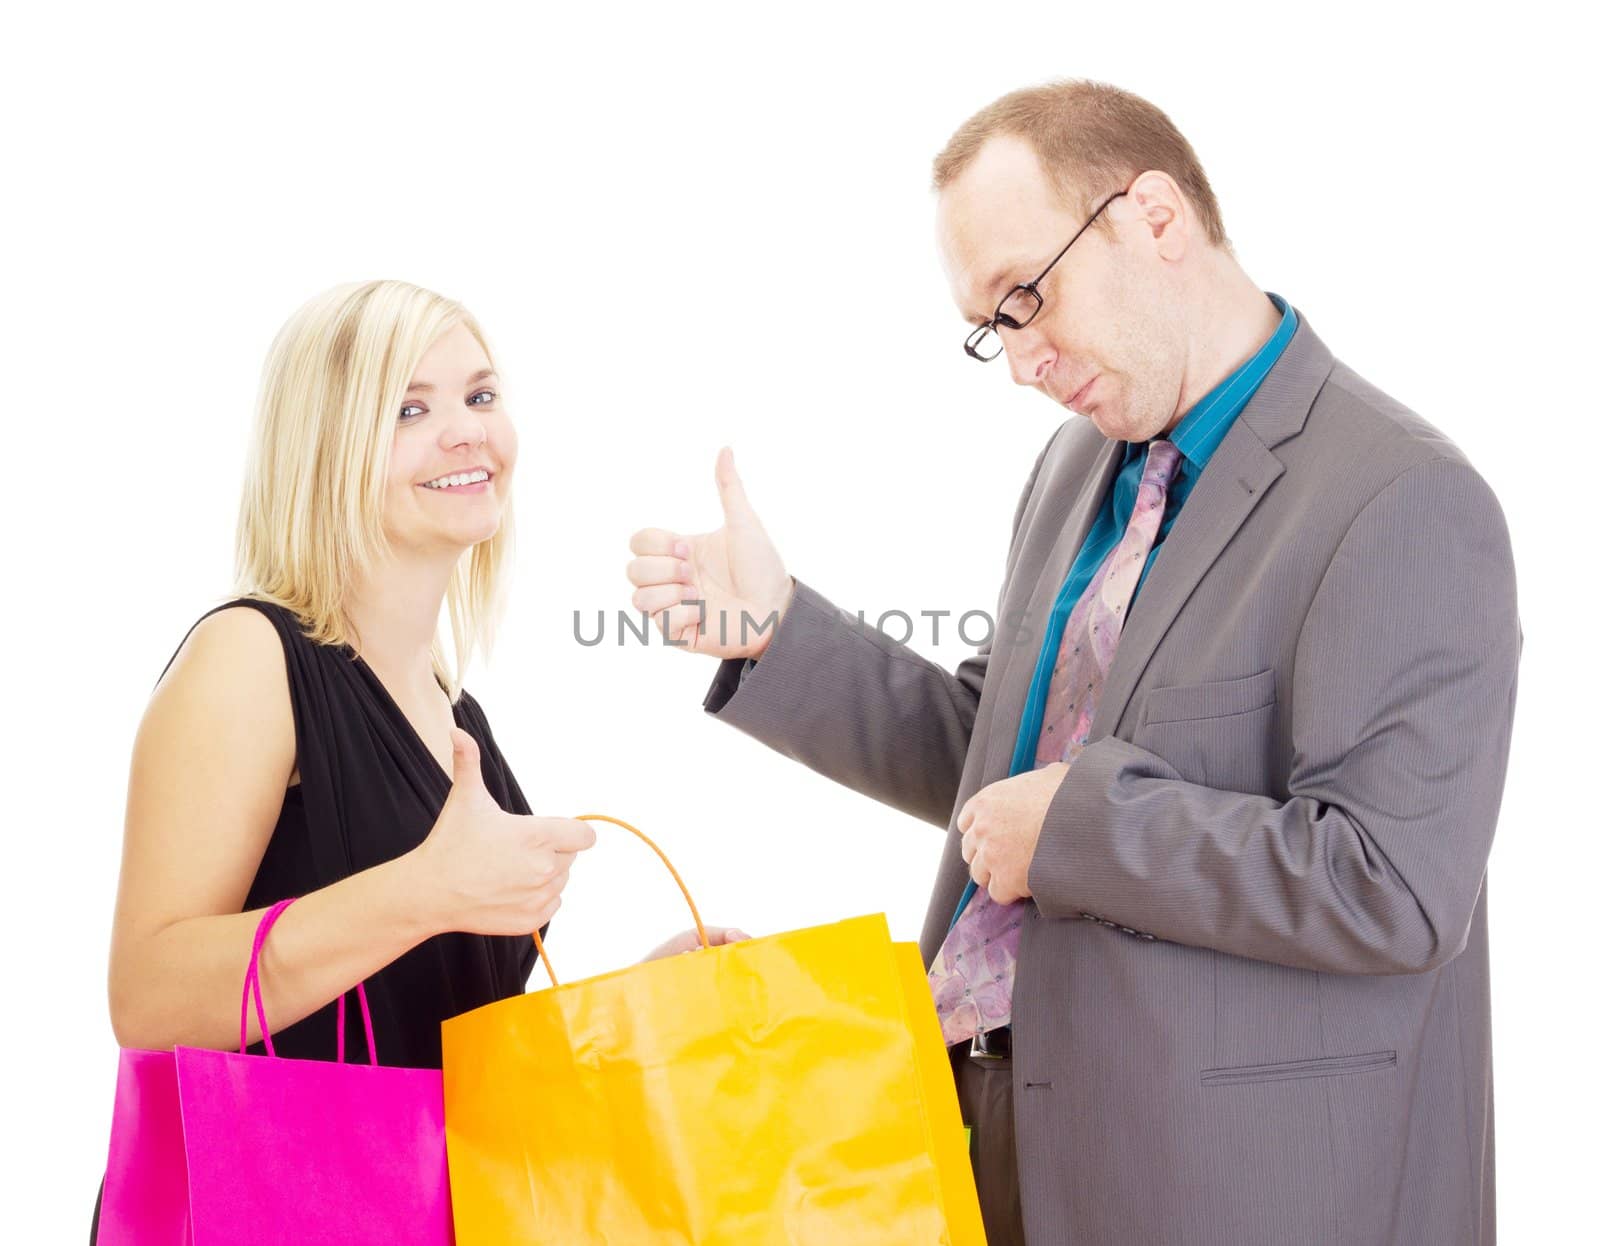 Two business people on a shopping tour by gwolters